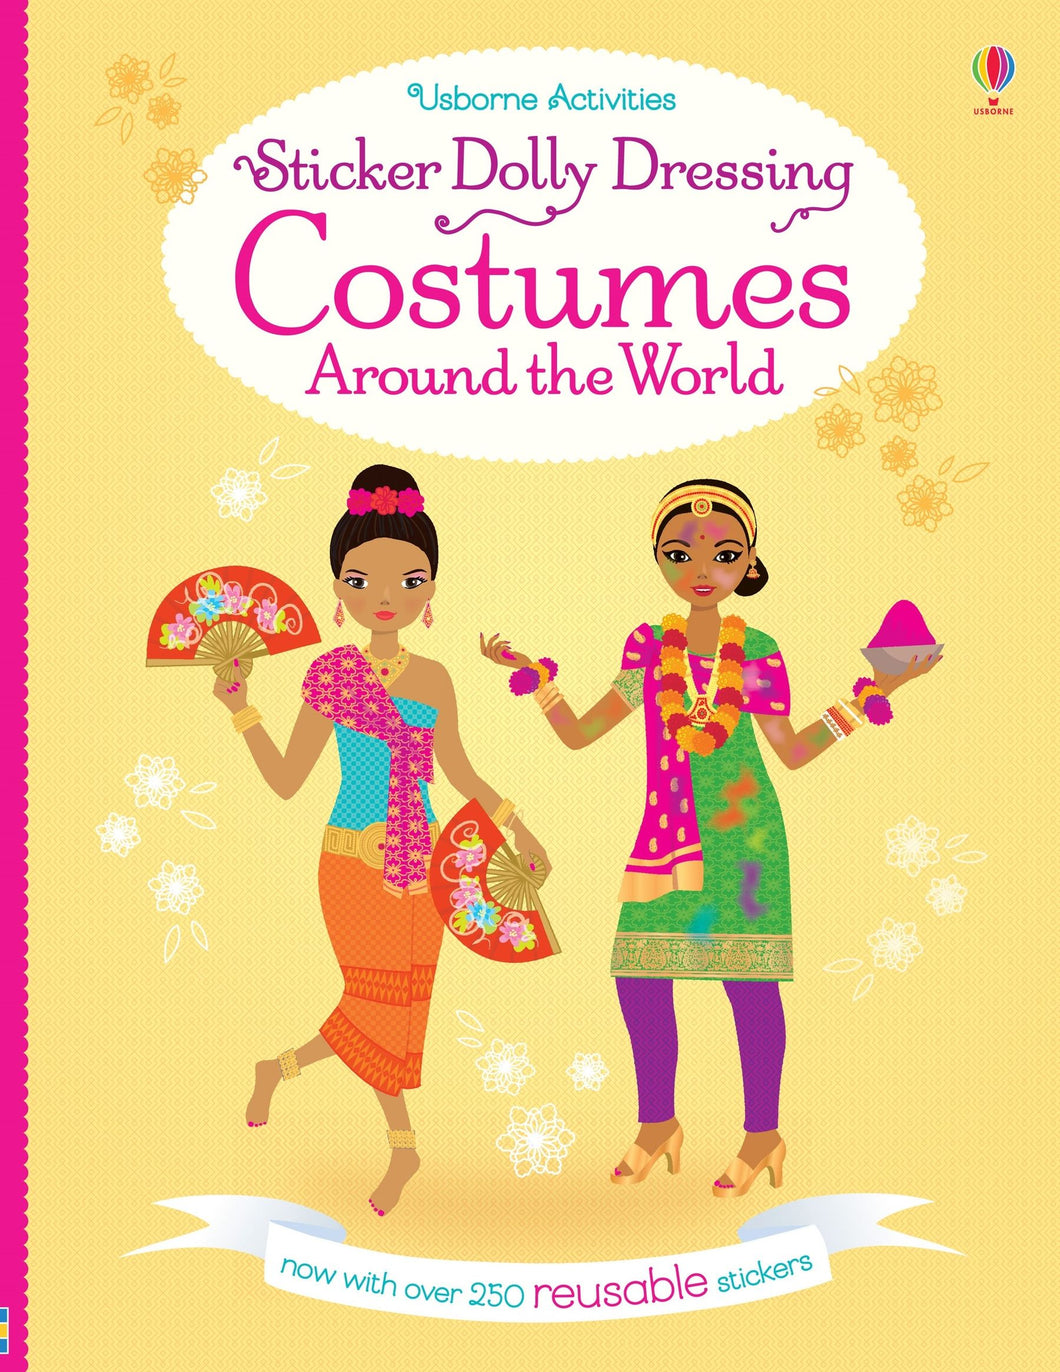 Sticker Dolly Dressing Costumes Around the World